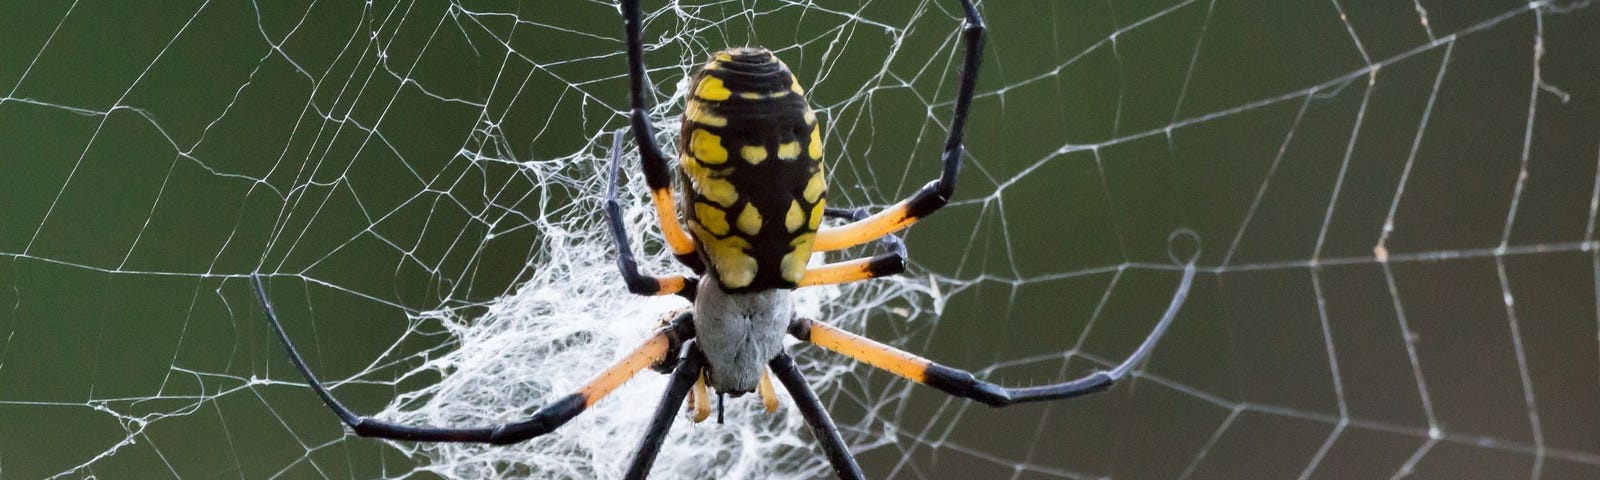 image of a yellow and black garden spider on a web with a spiral